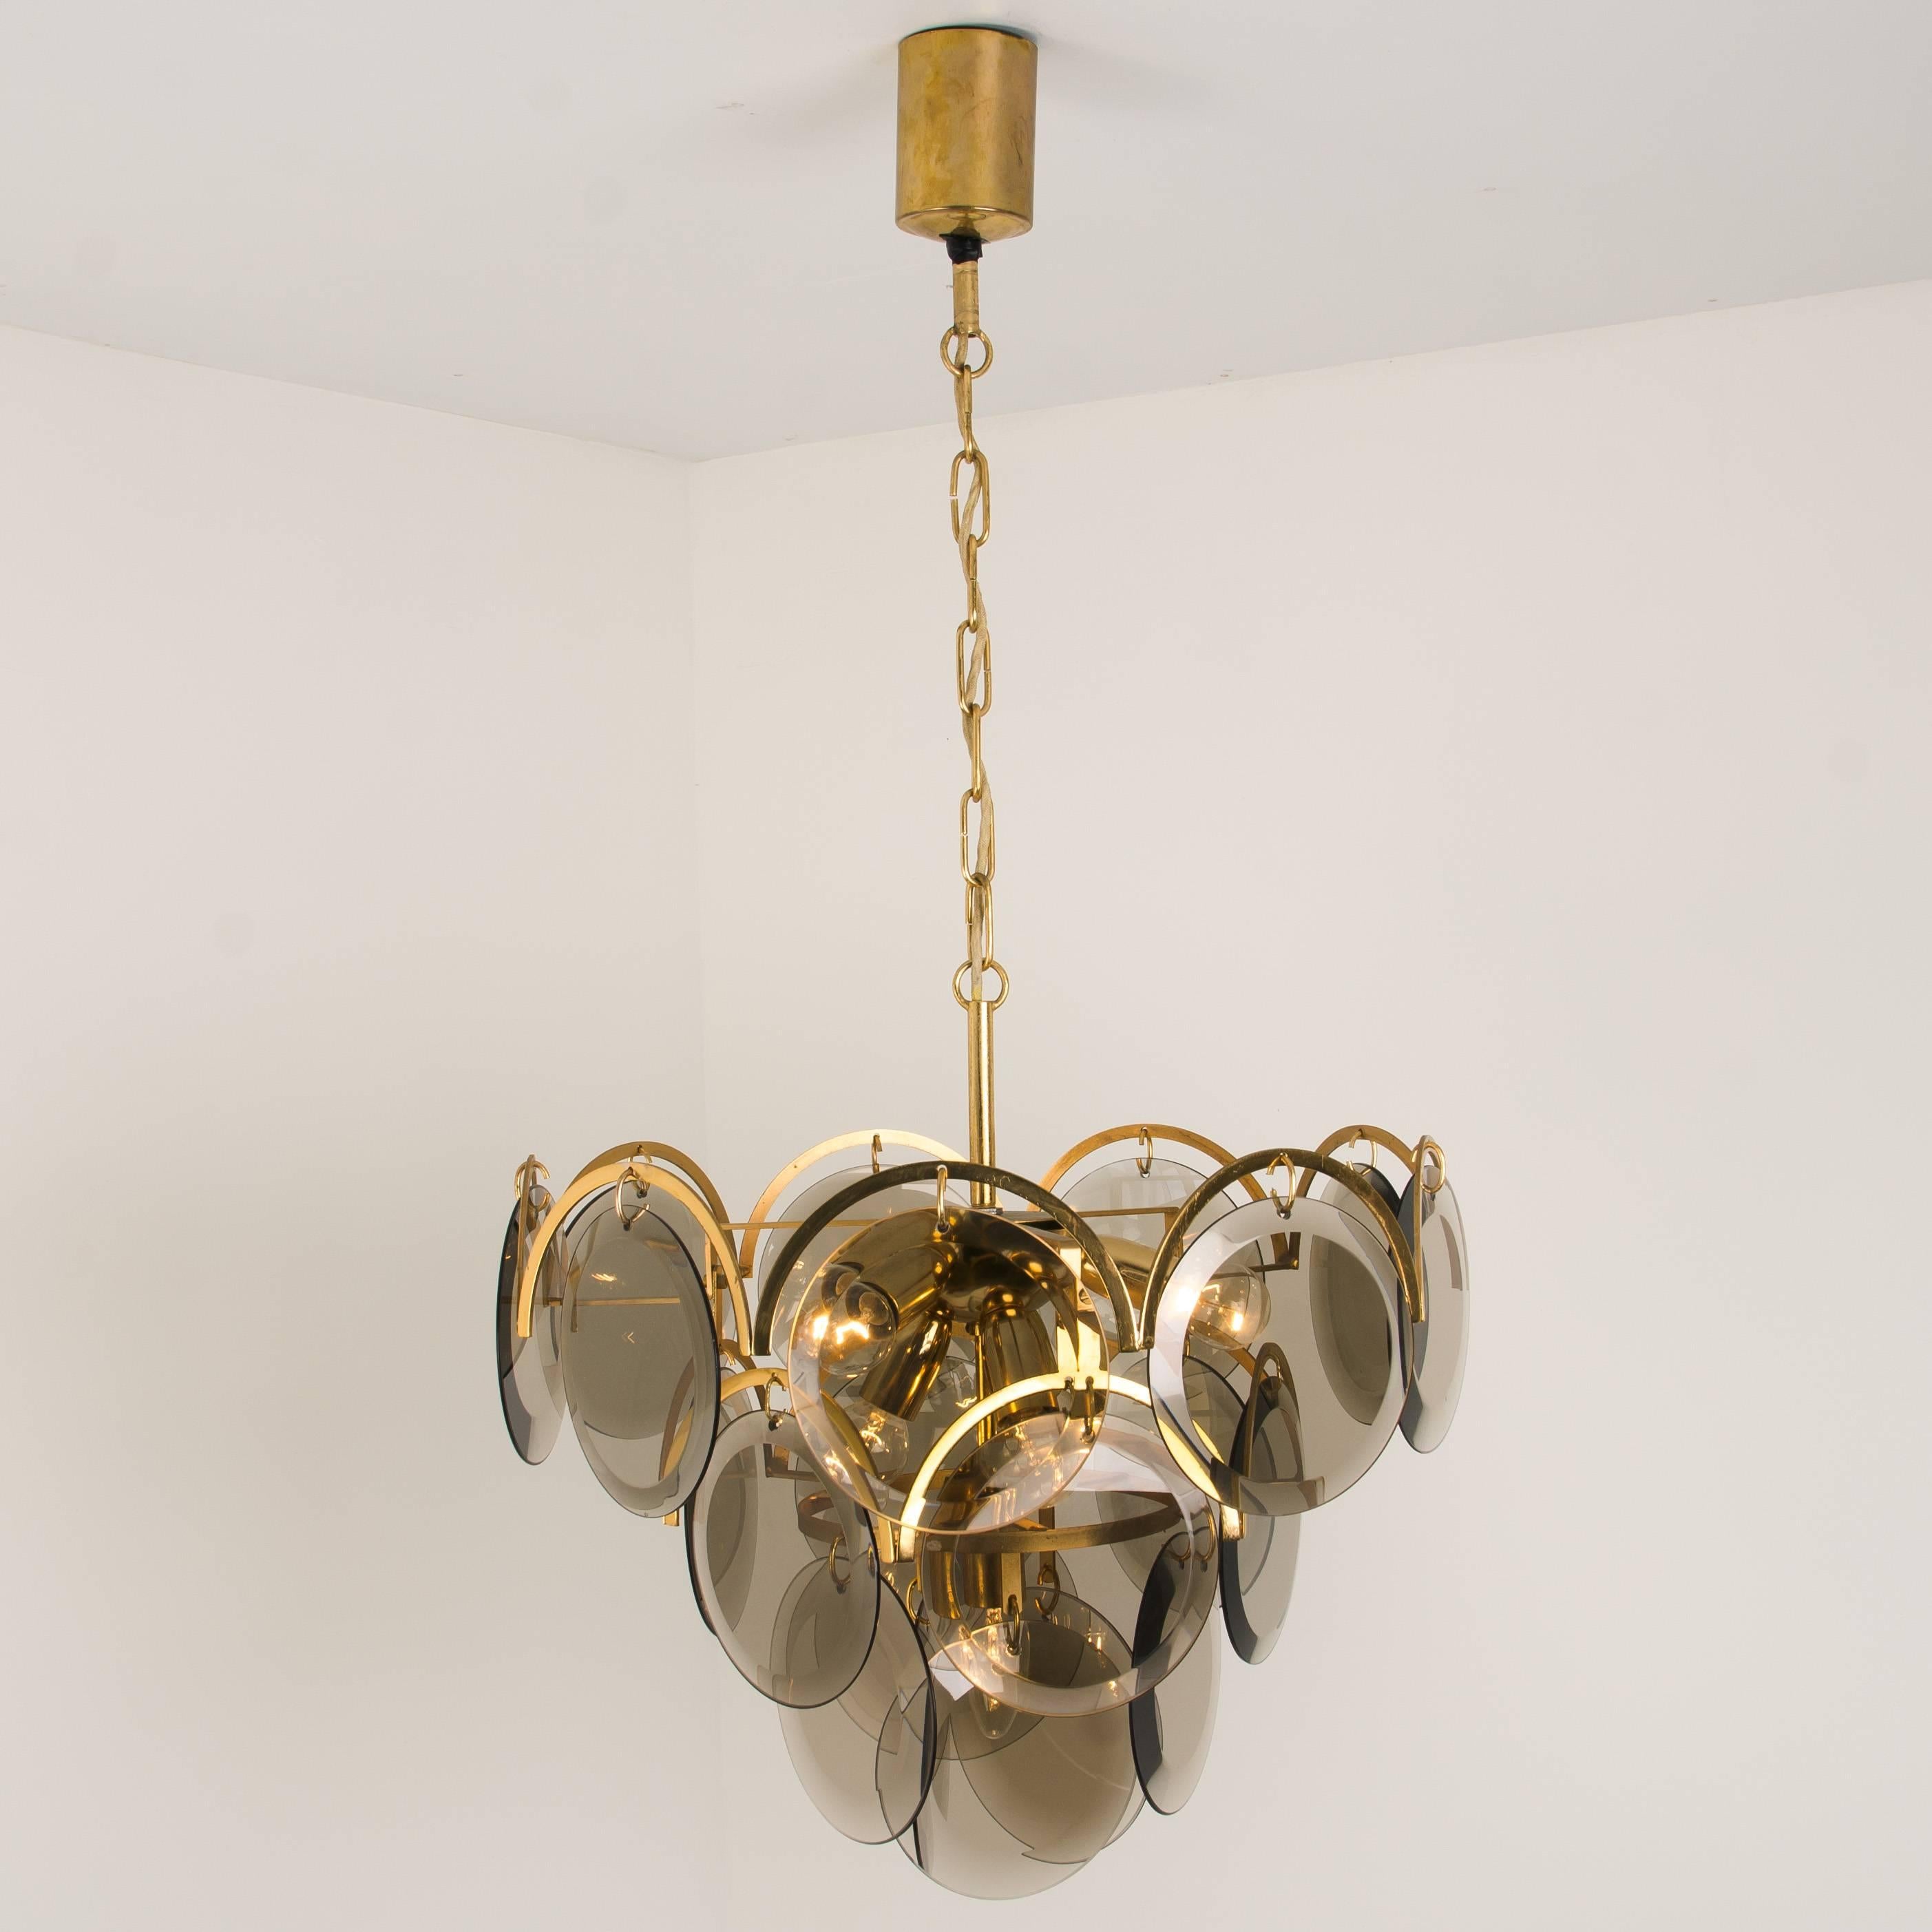 Set of Three Smoked Glass and Brass Chandeliers in the Style of Vistosi, Italy For Sale 2